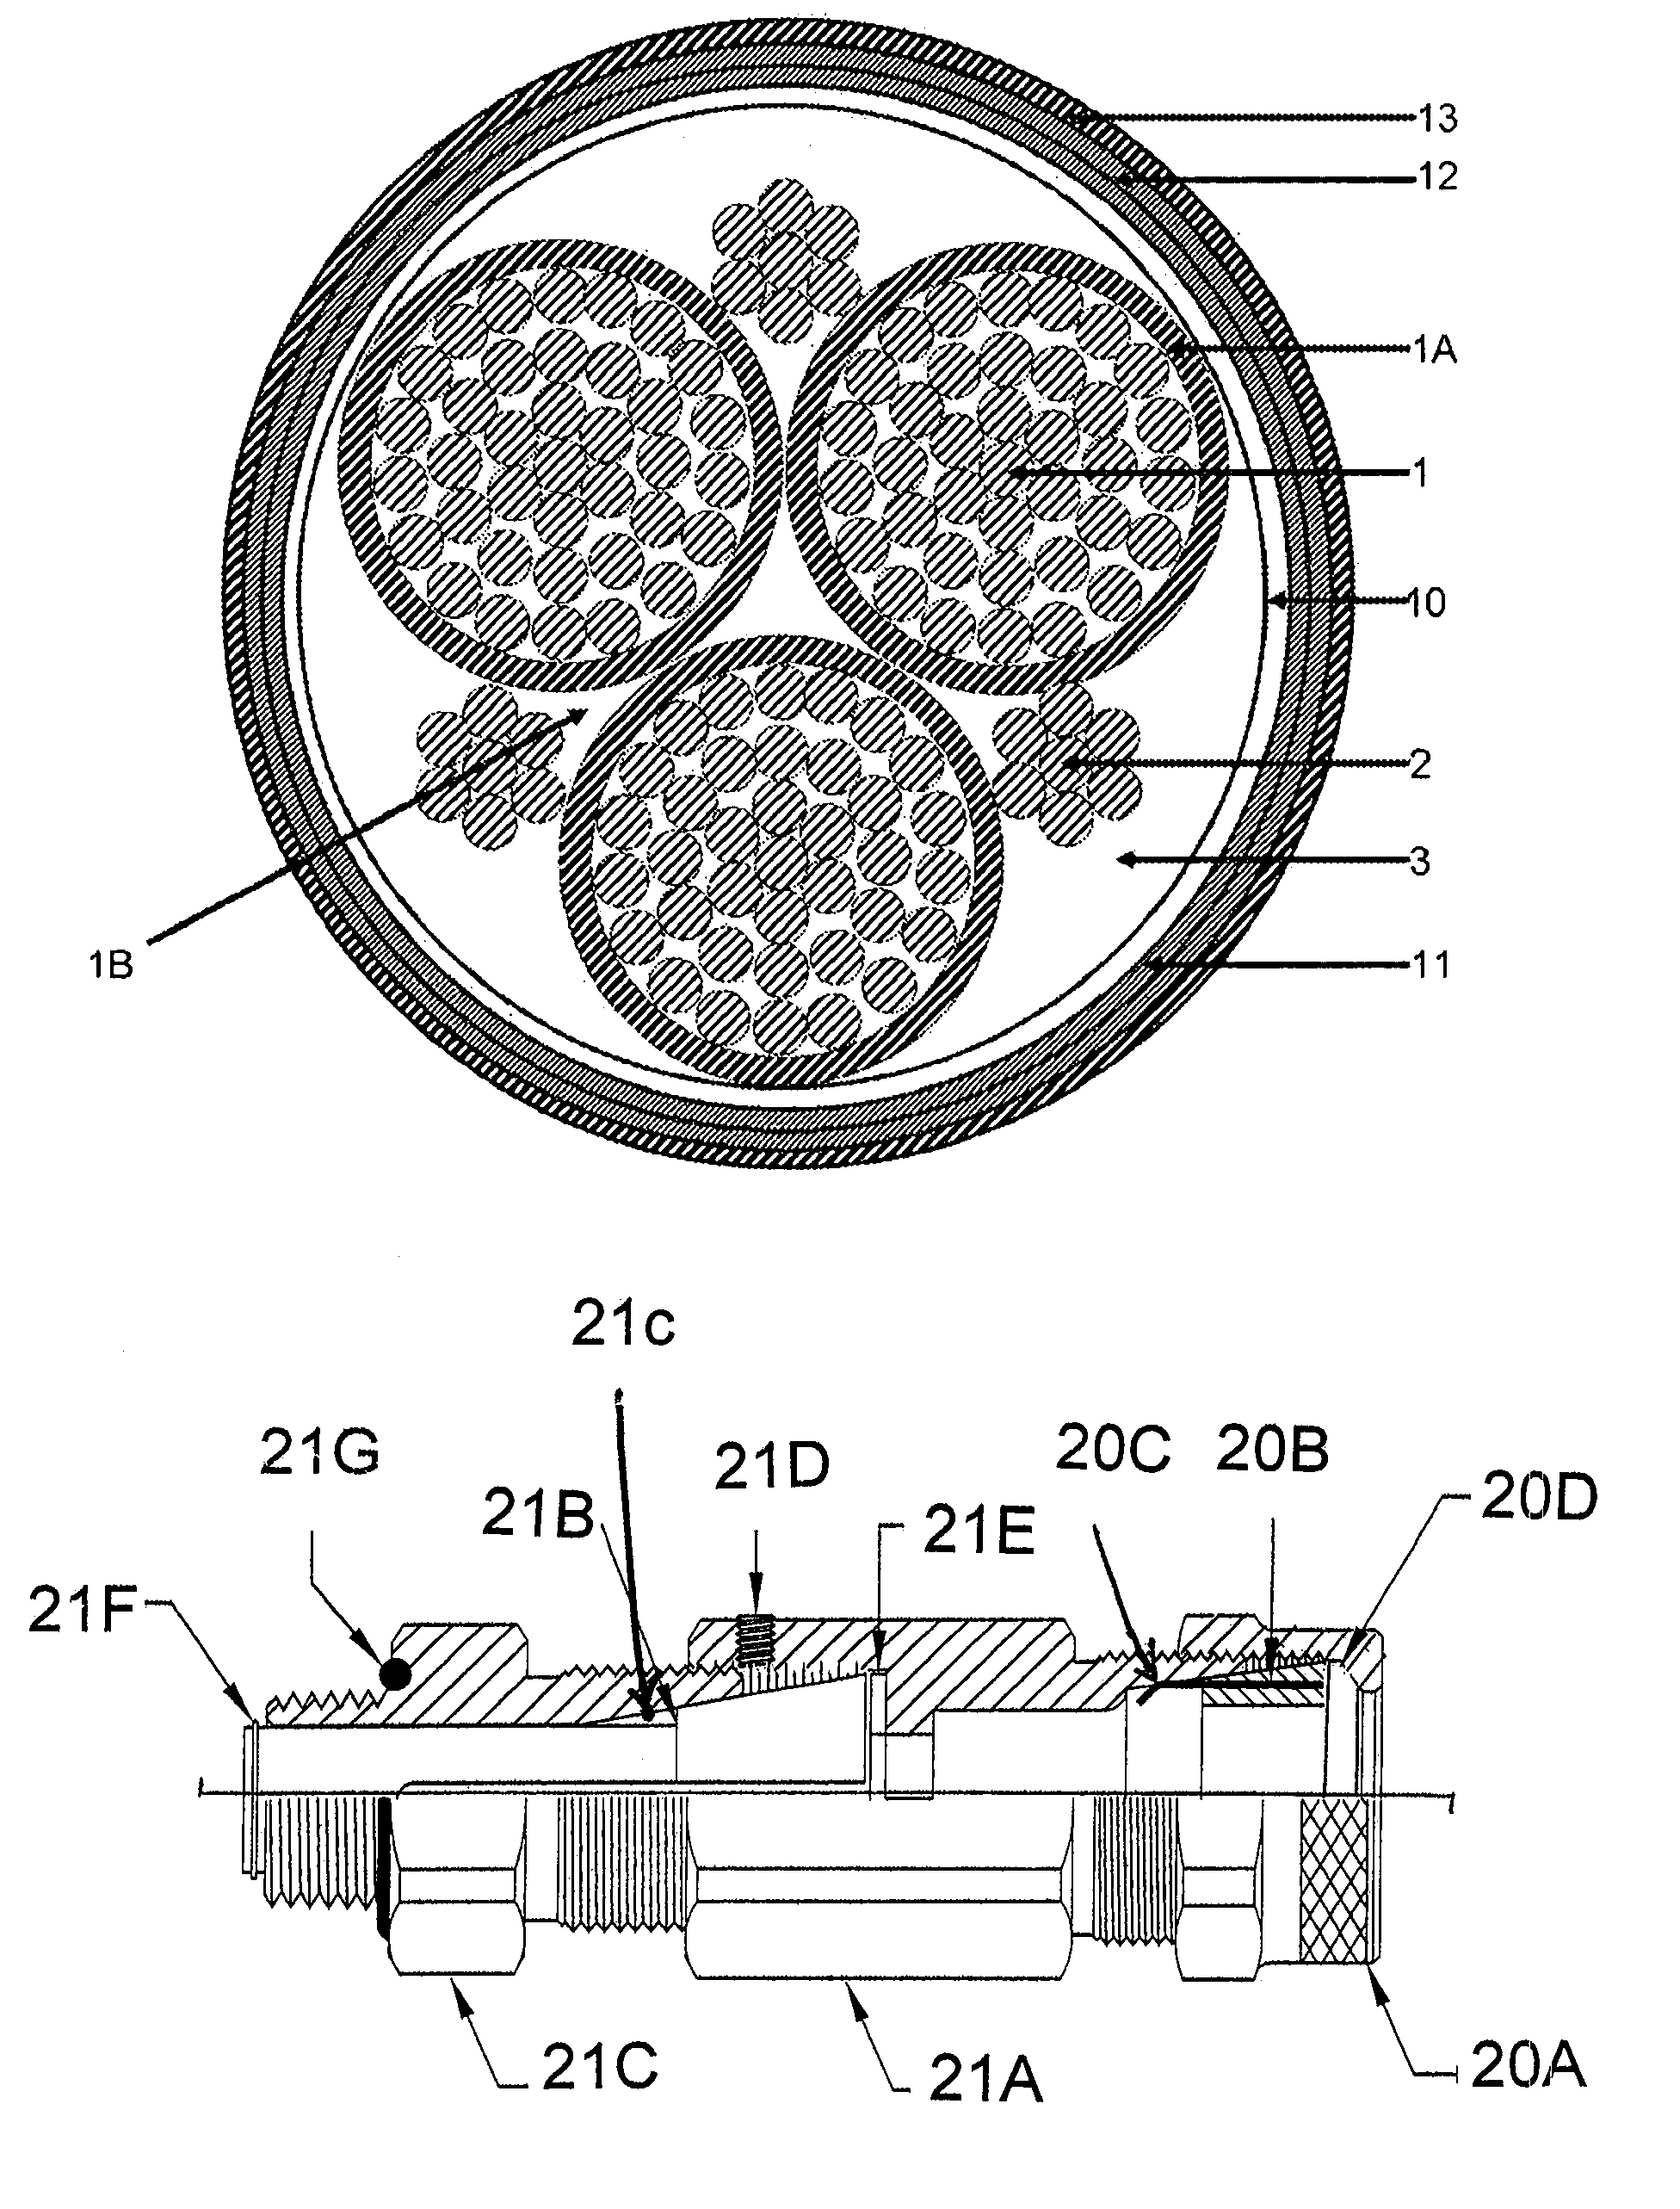 Adjustable speed drive/variable frequency drive cable, connector and termination system